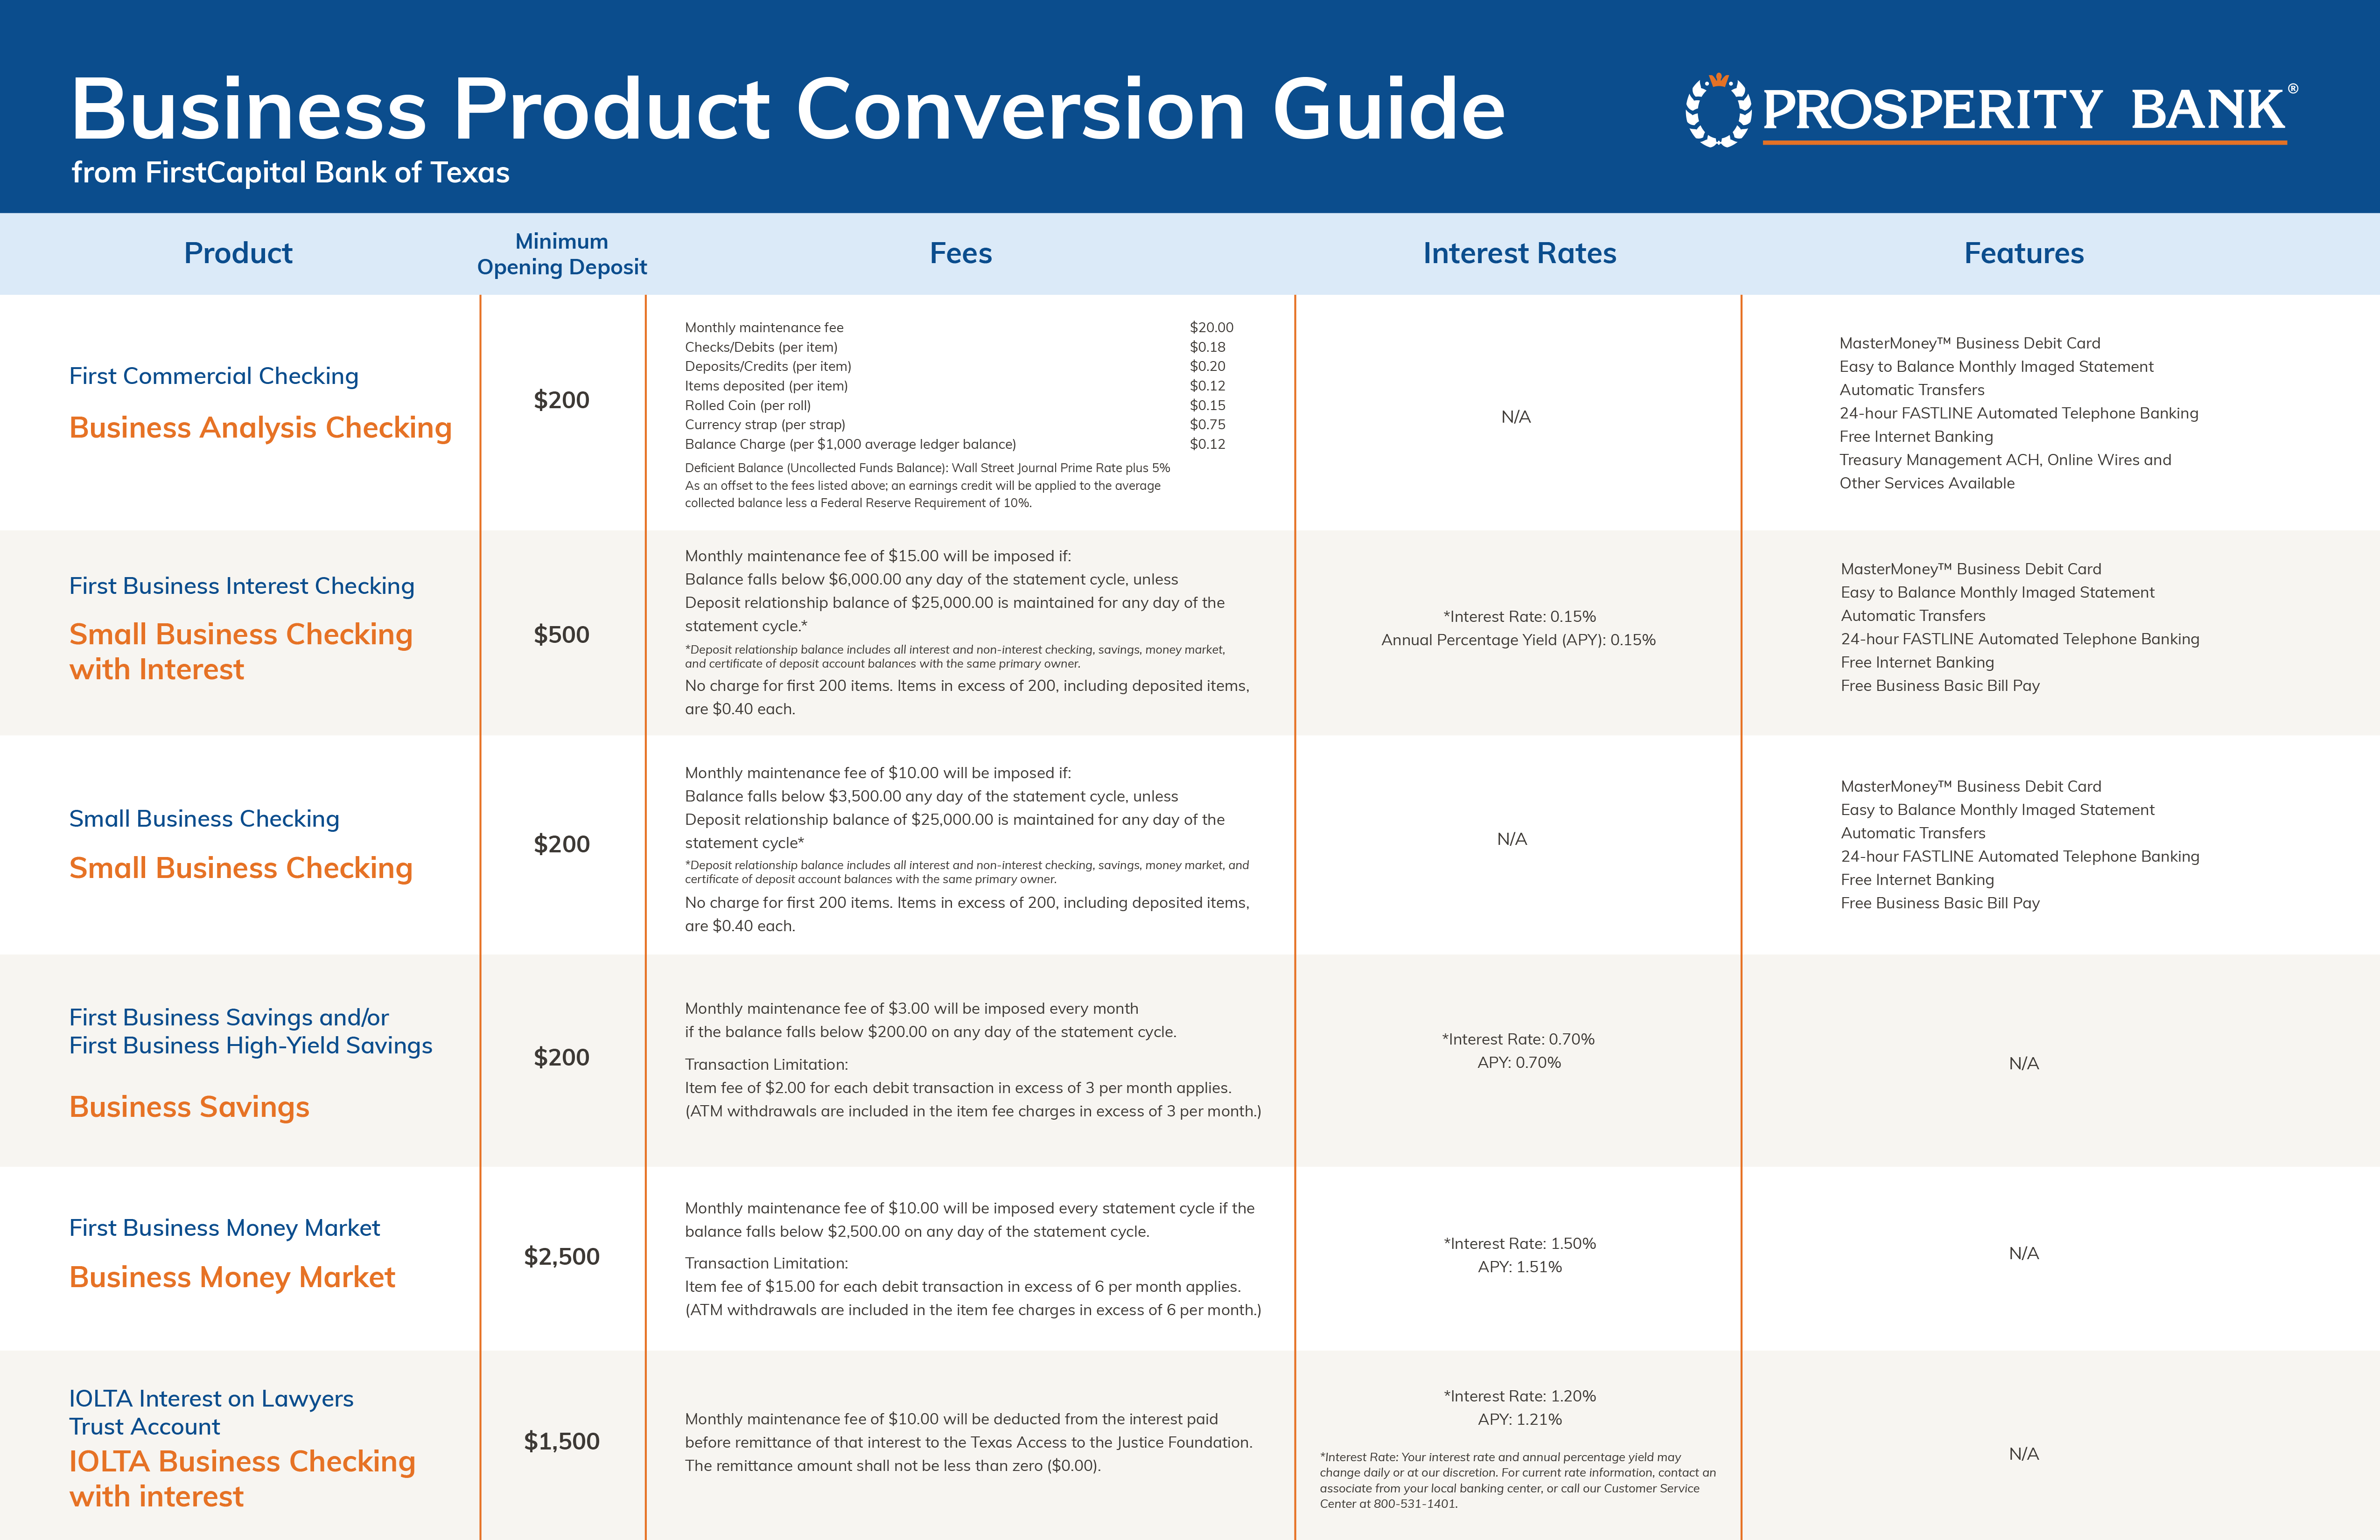 FirstCapital - Business Product Conversion Guide-2